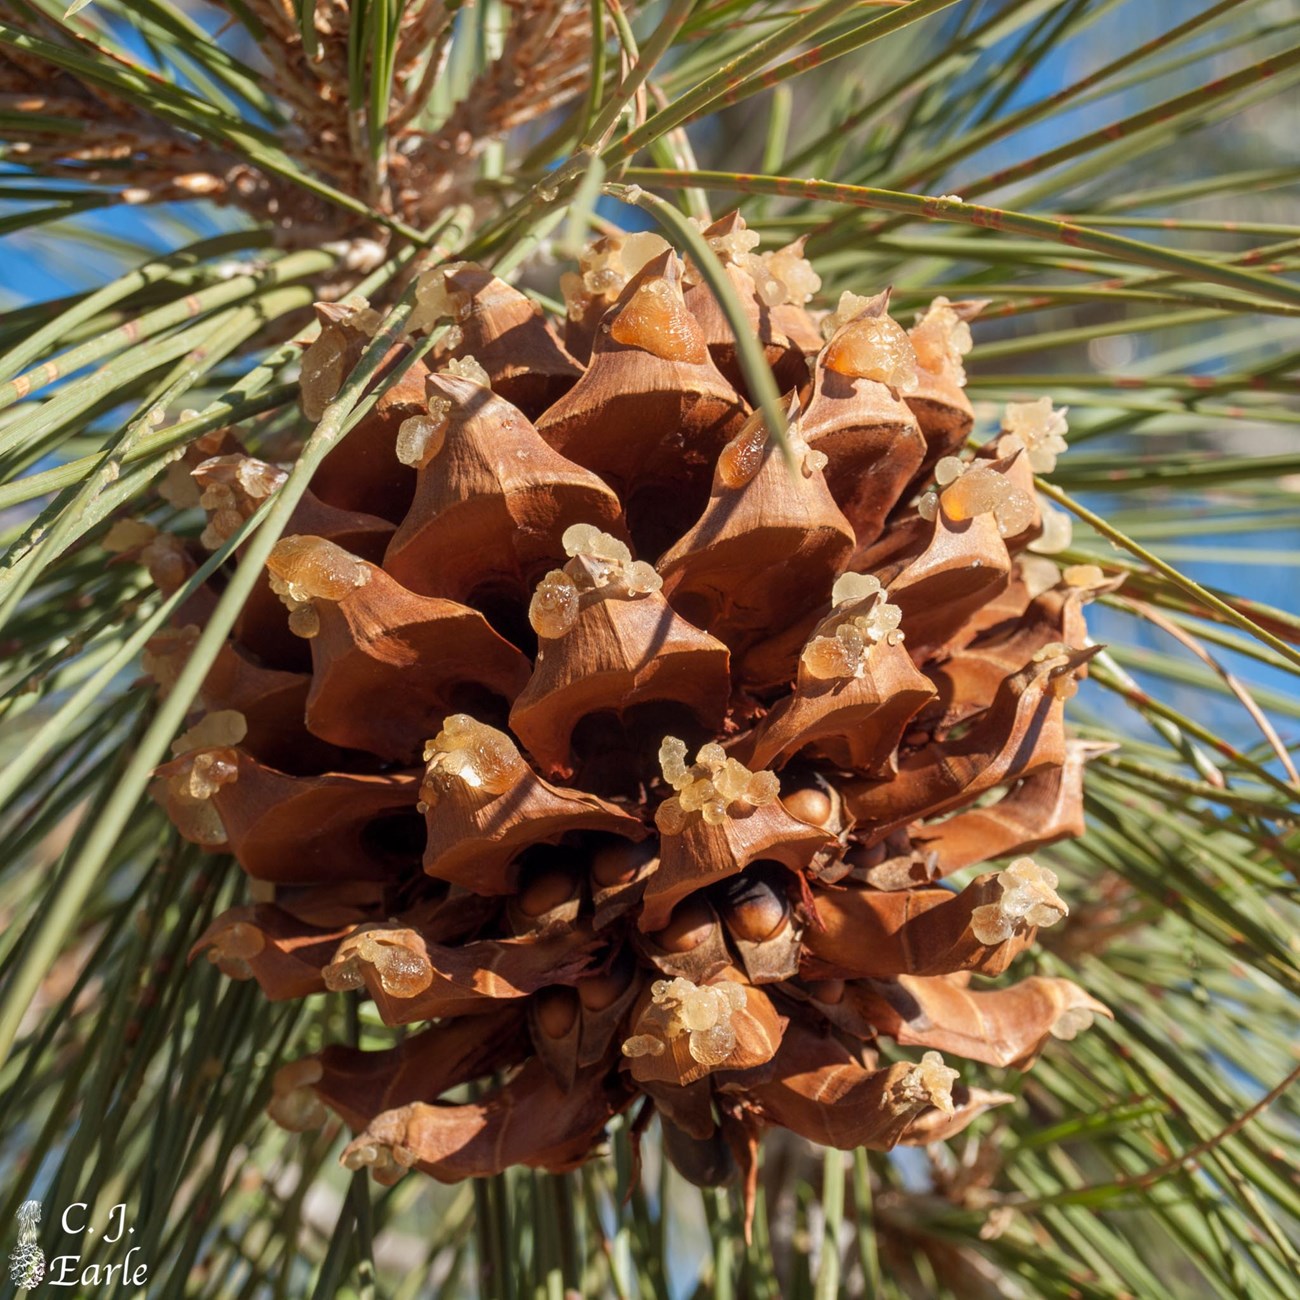 Large, round, pine cone with sharp tips.